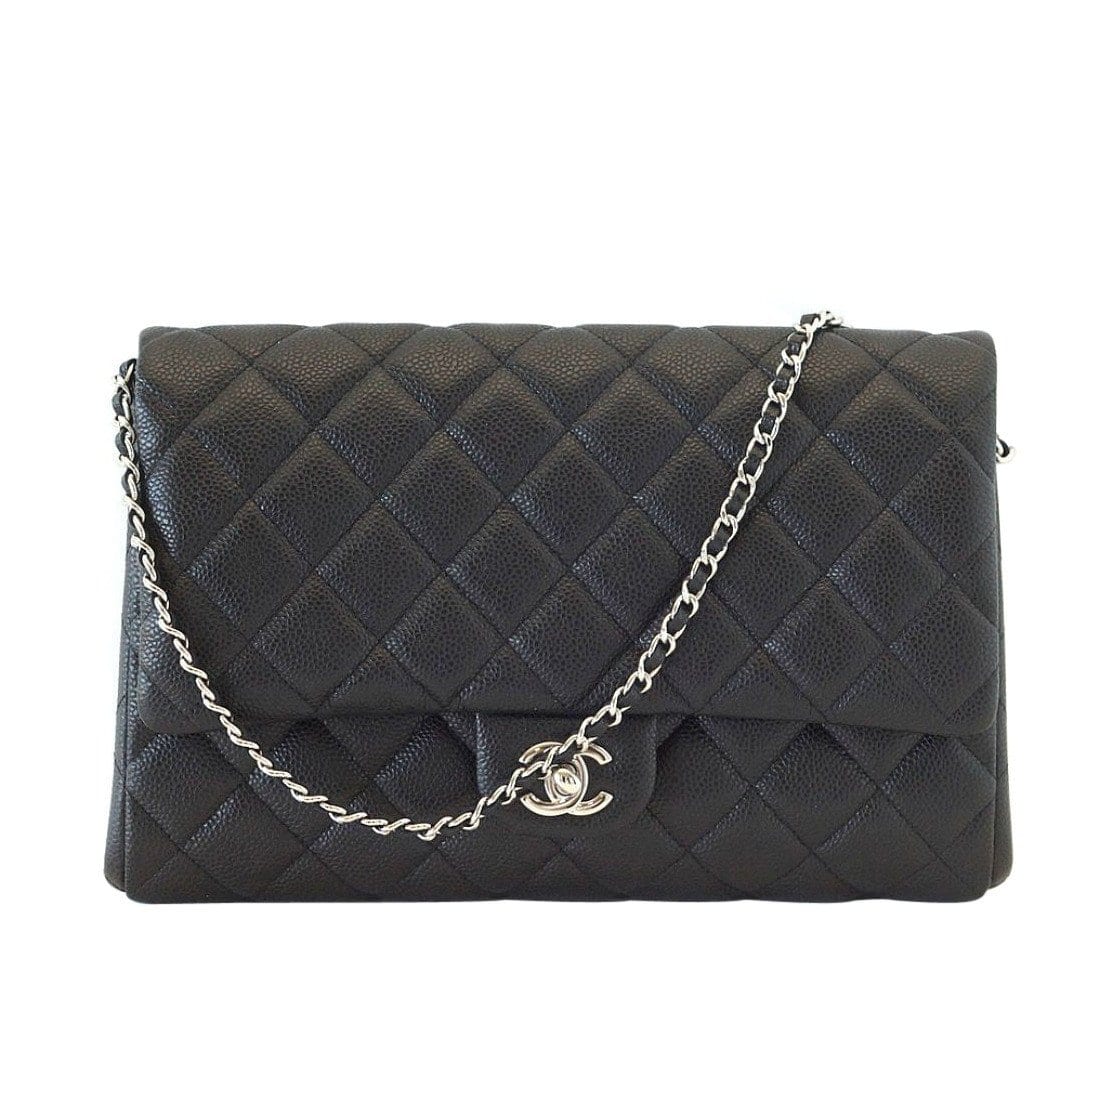 Chanel Mini Classic Shoulder Flap - Lambskin Red | Baghunter